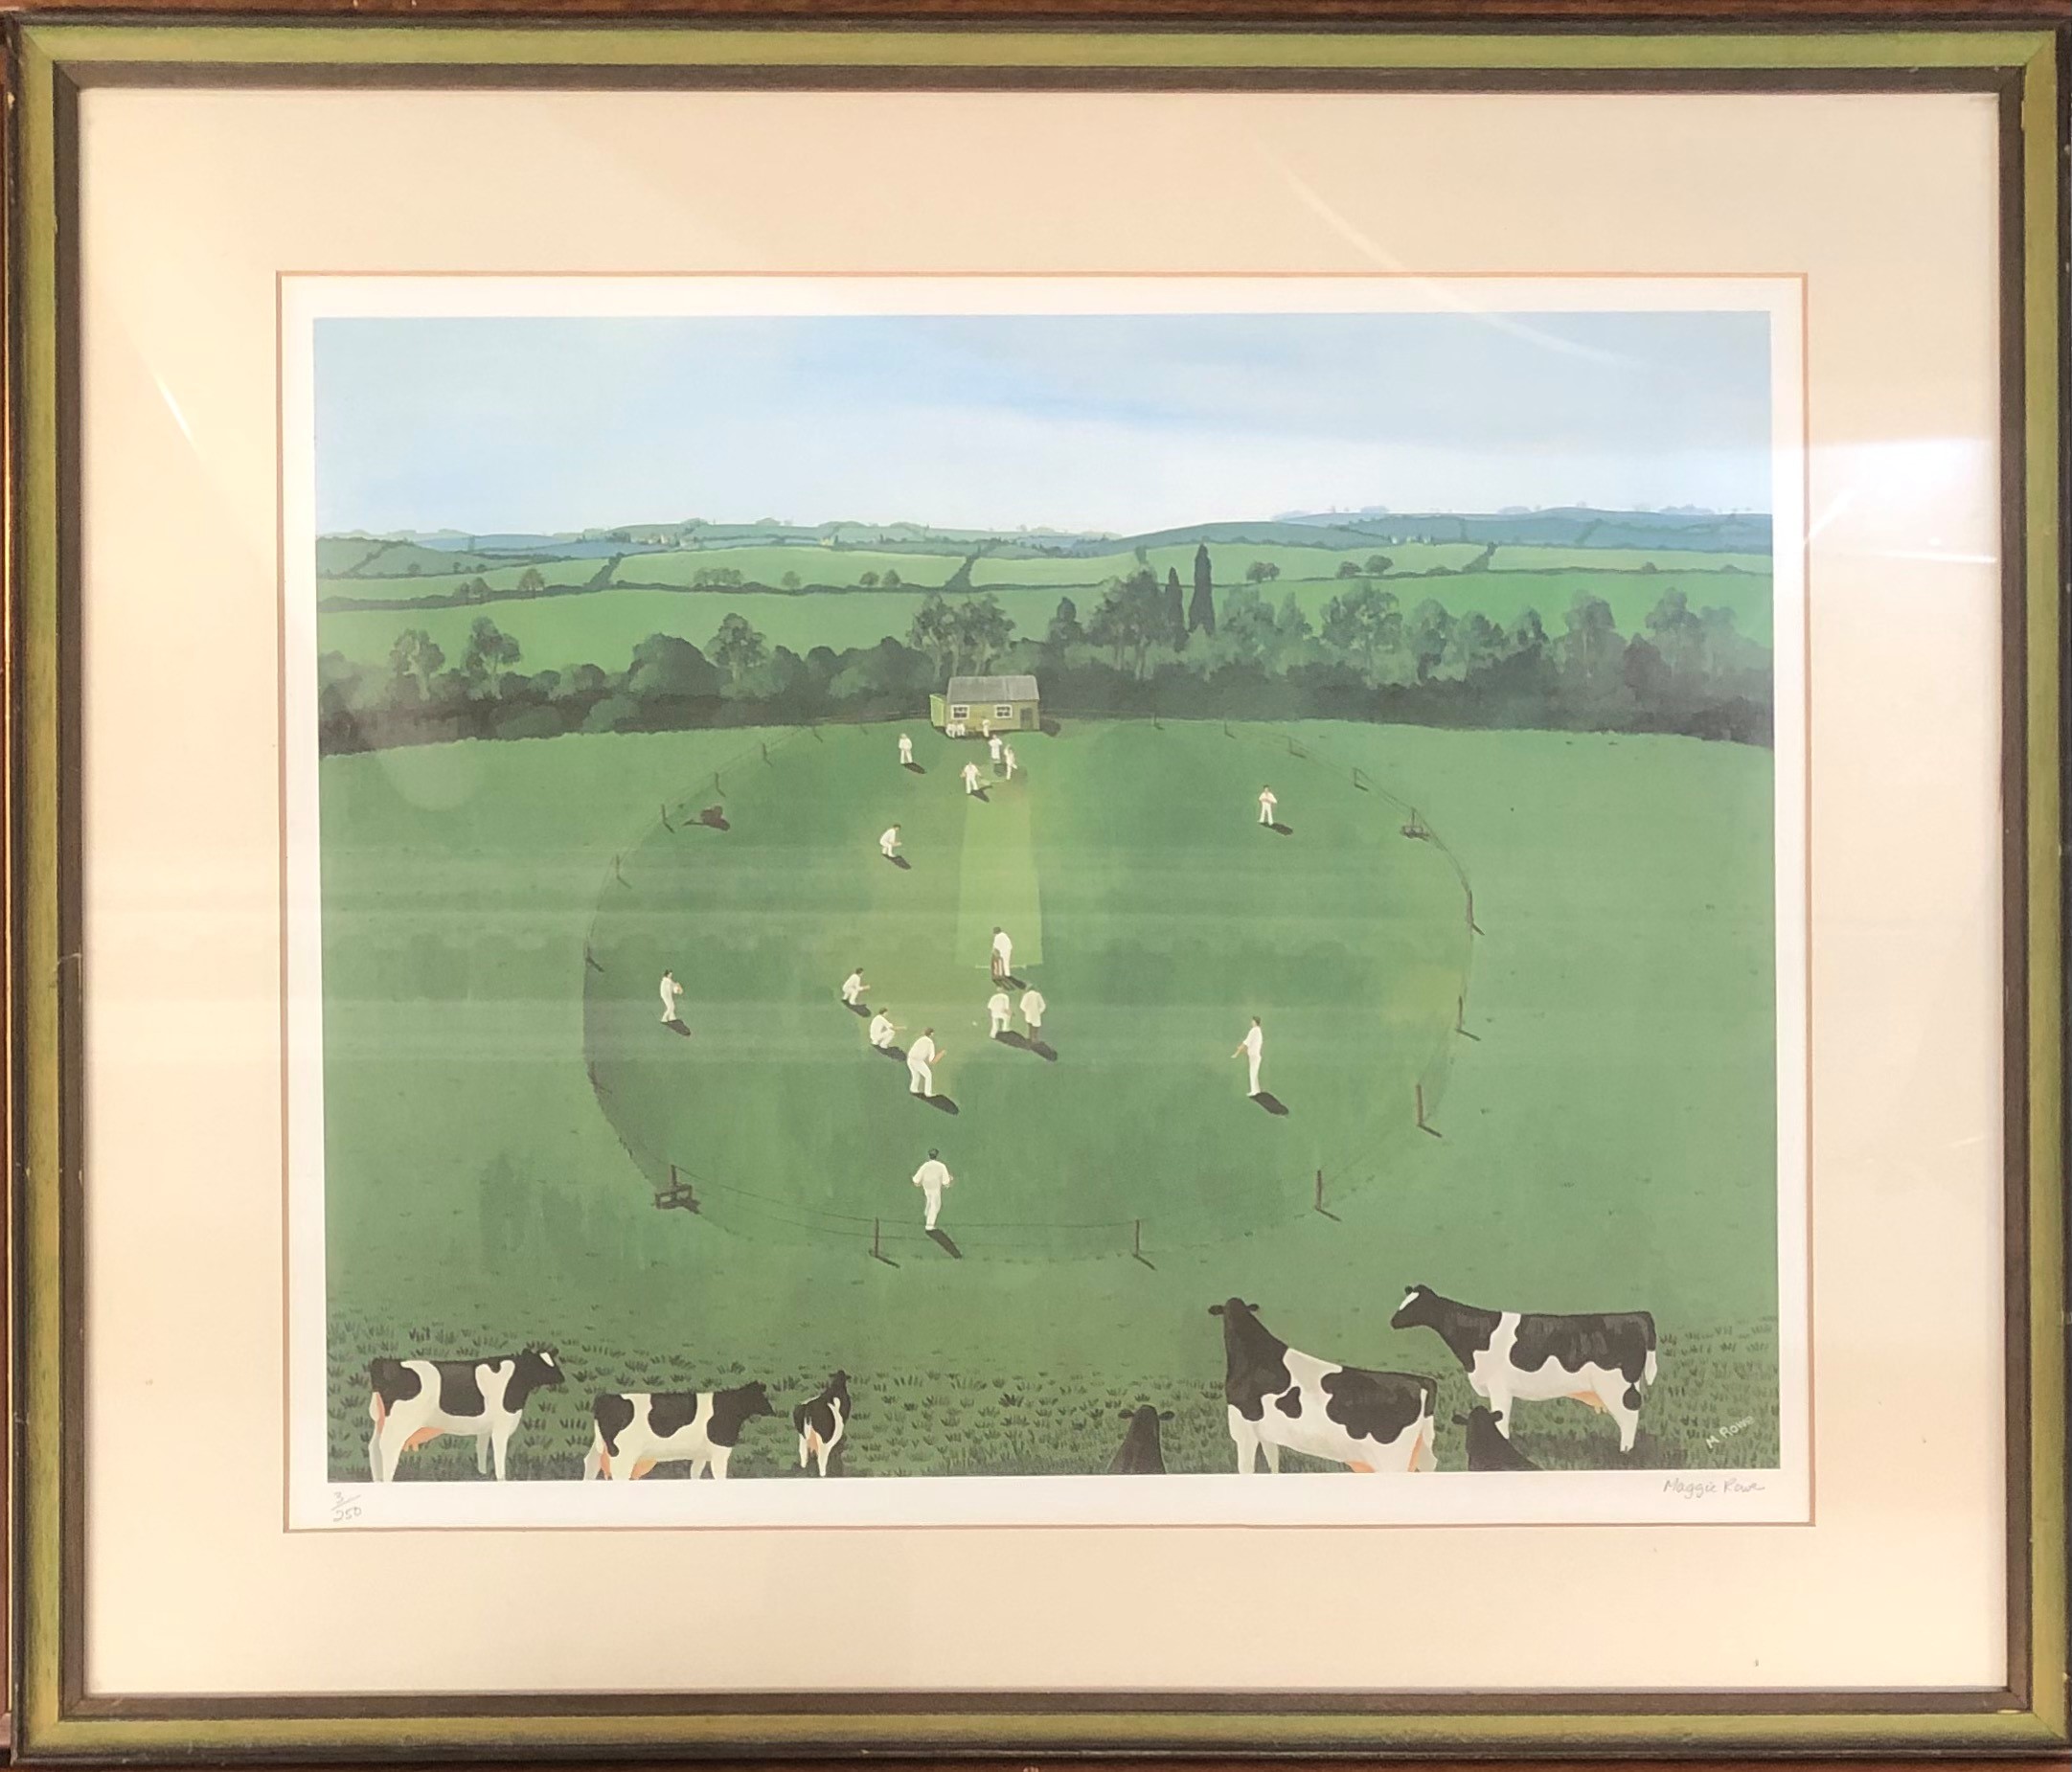 MAGGIE ROWE, LIMITED EDITION PRINT 3/250 Titled 'The Cricket Match', signed, along with Terence - Image 2 of 3